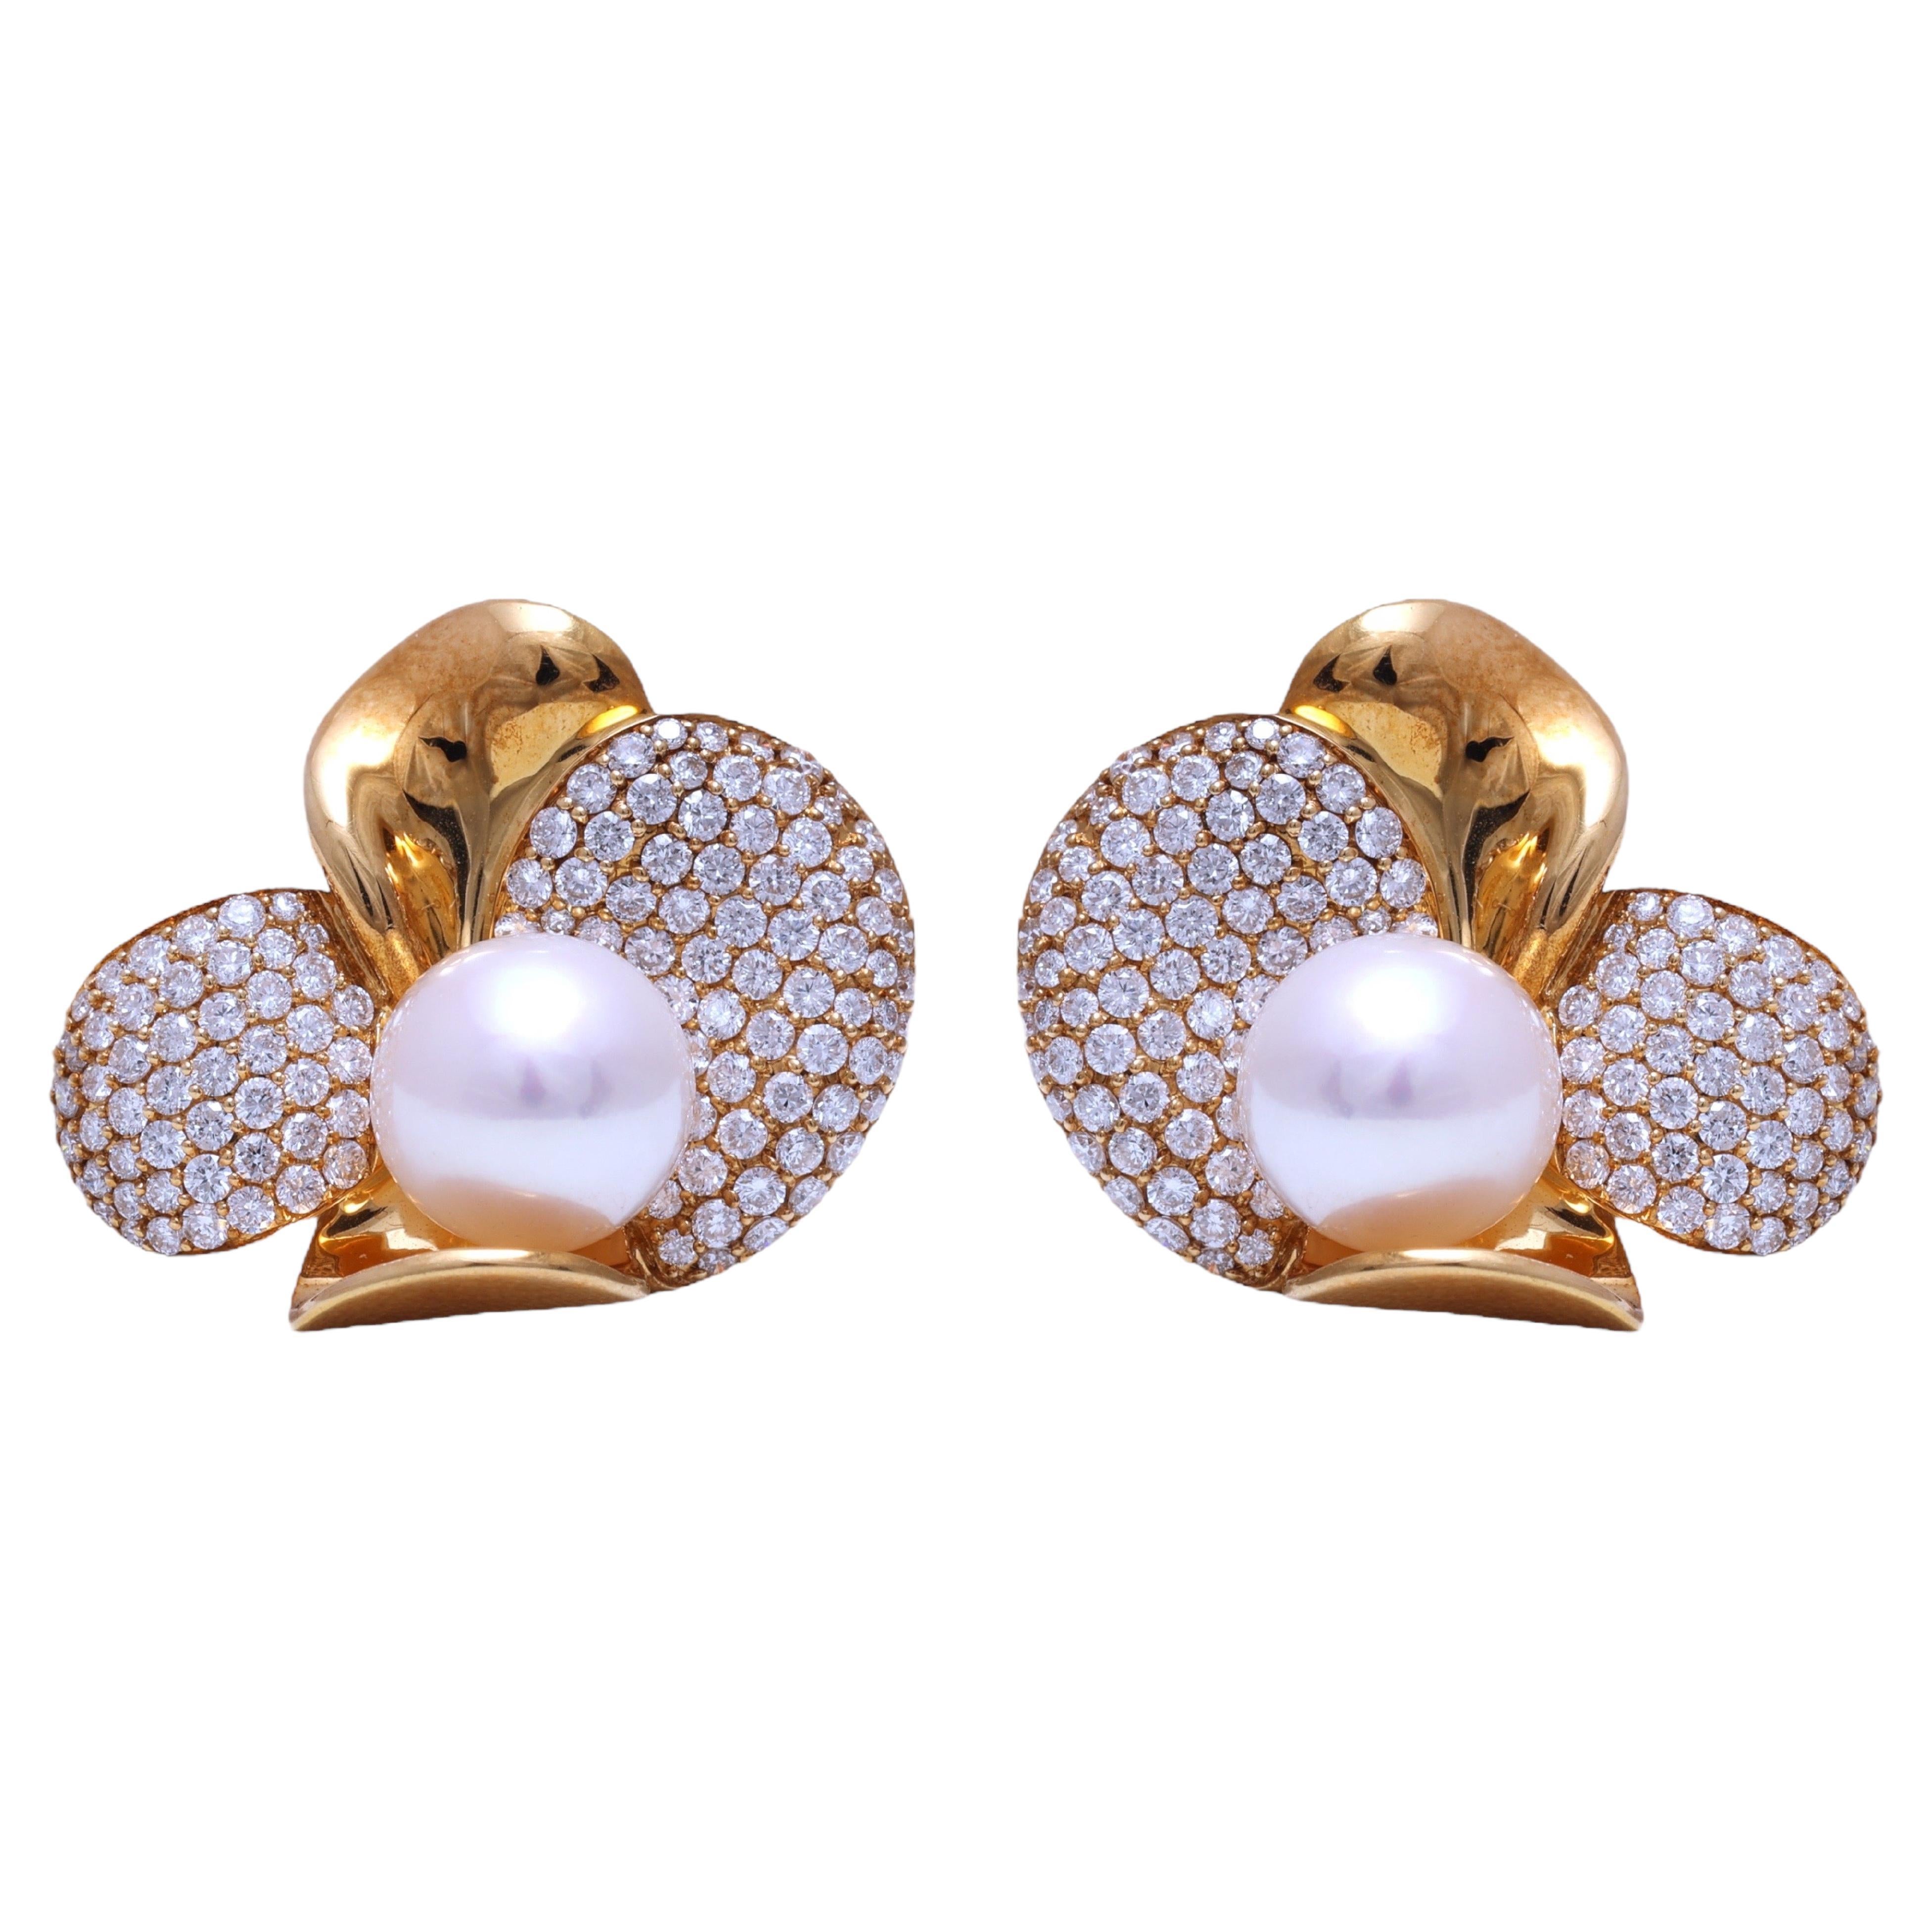 18 Kt Yellow Gold Clip on Earrings with Diamonds & Akoya Pearl